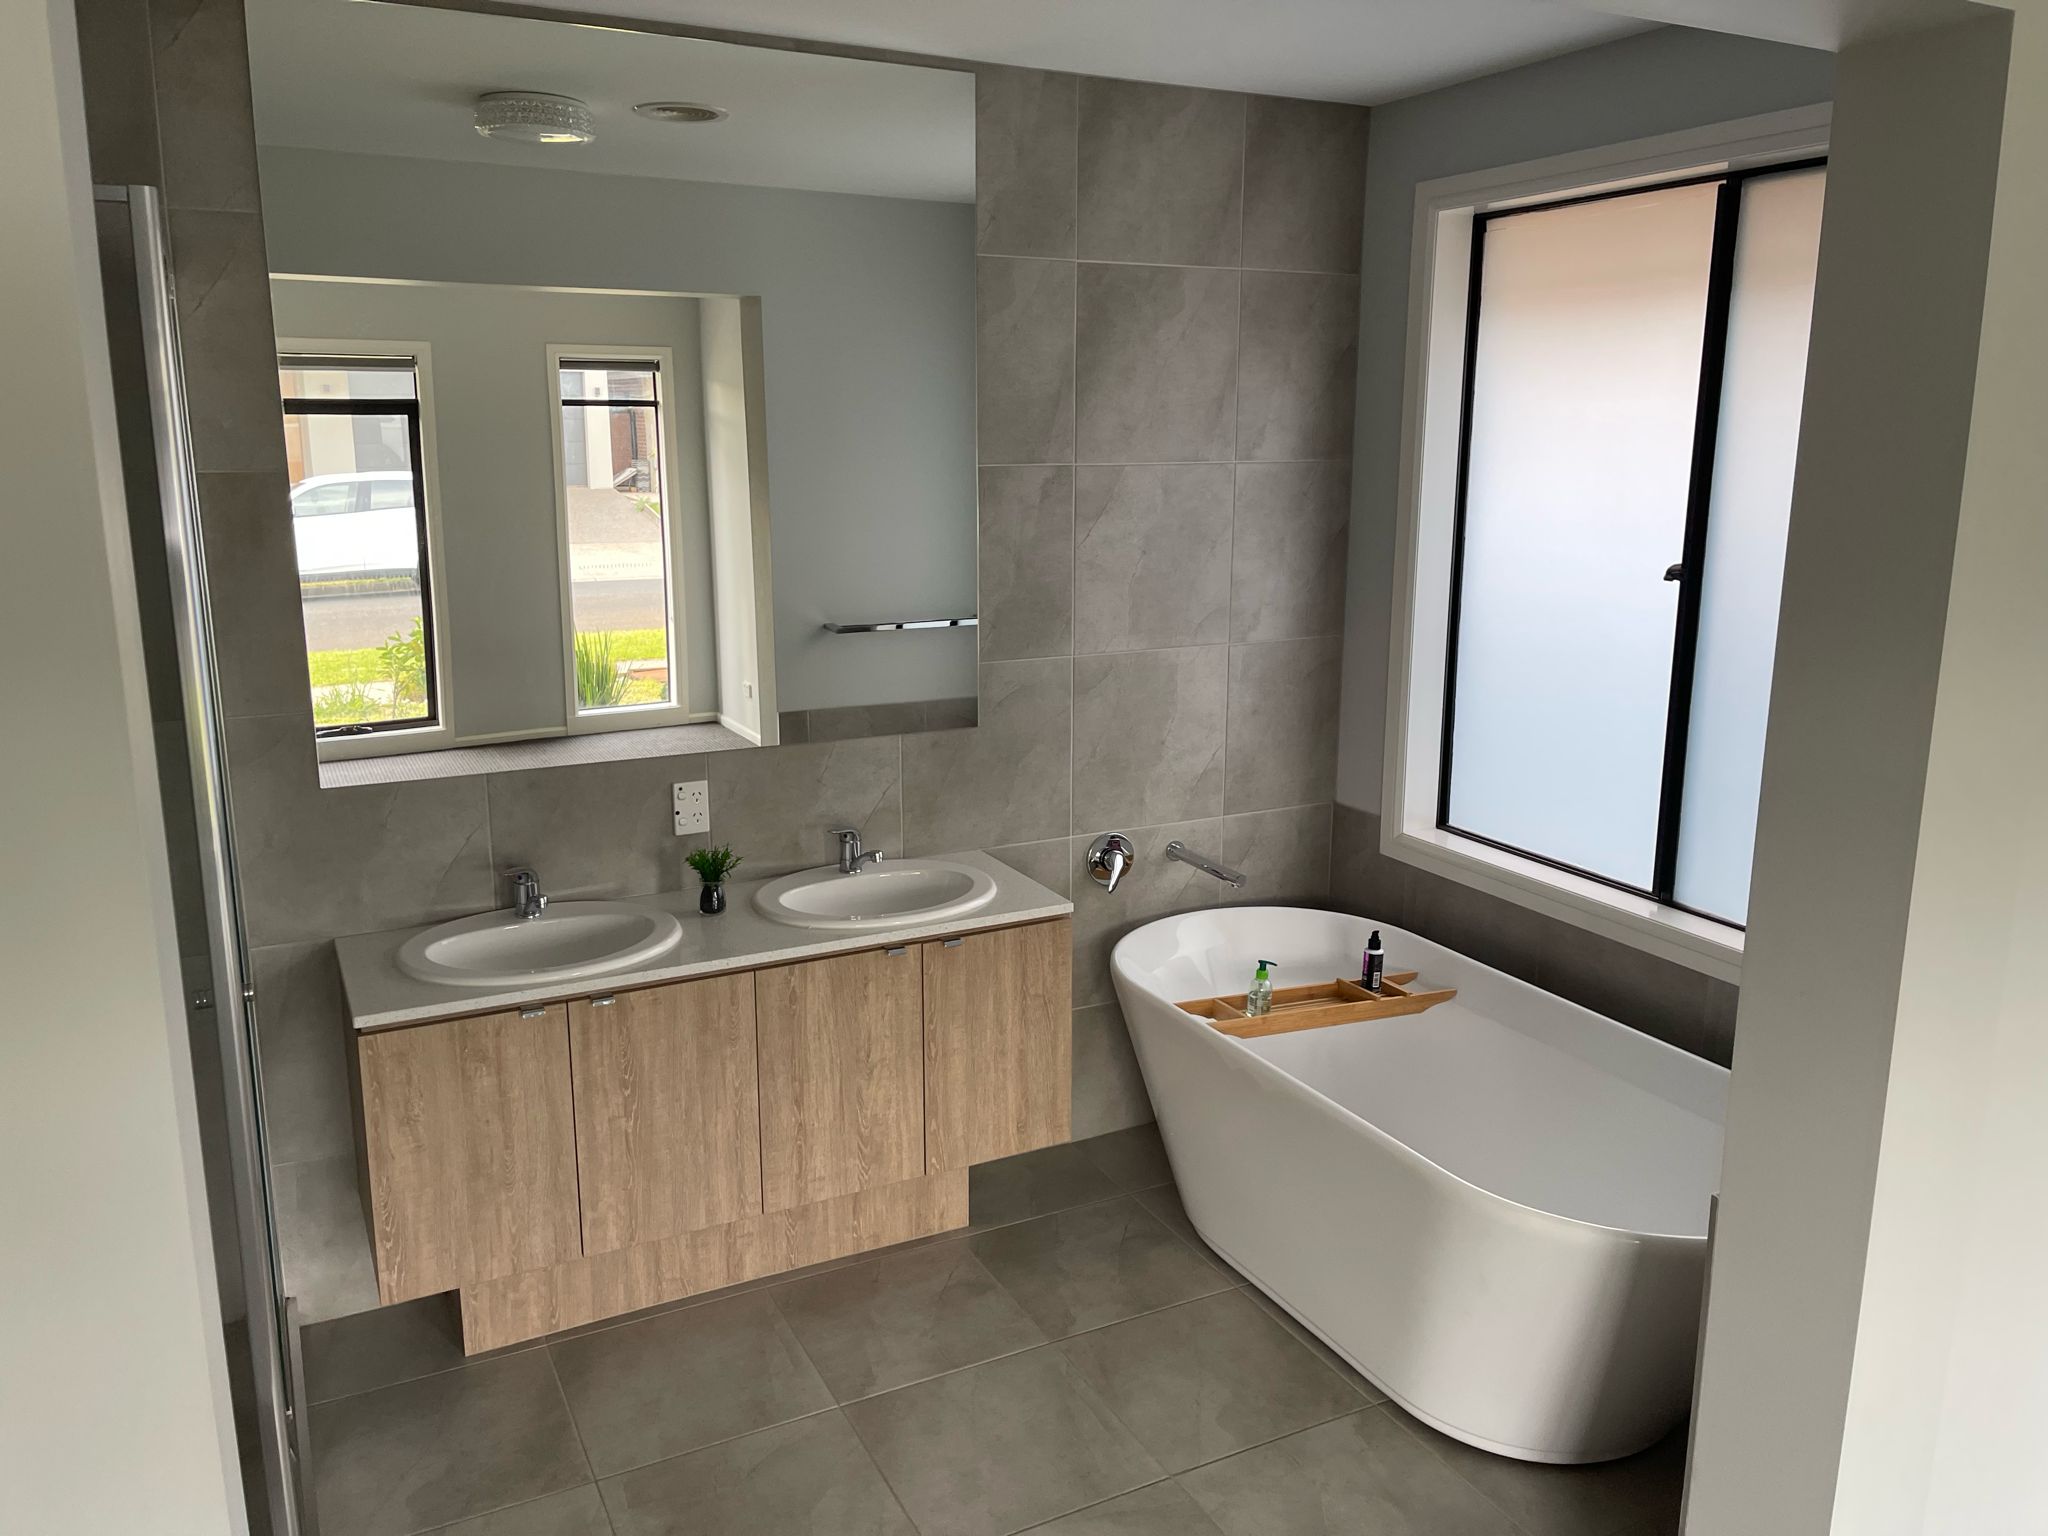 Bathroom Cleaning Service Melbourne - Wink Cleaning